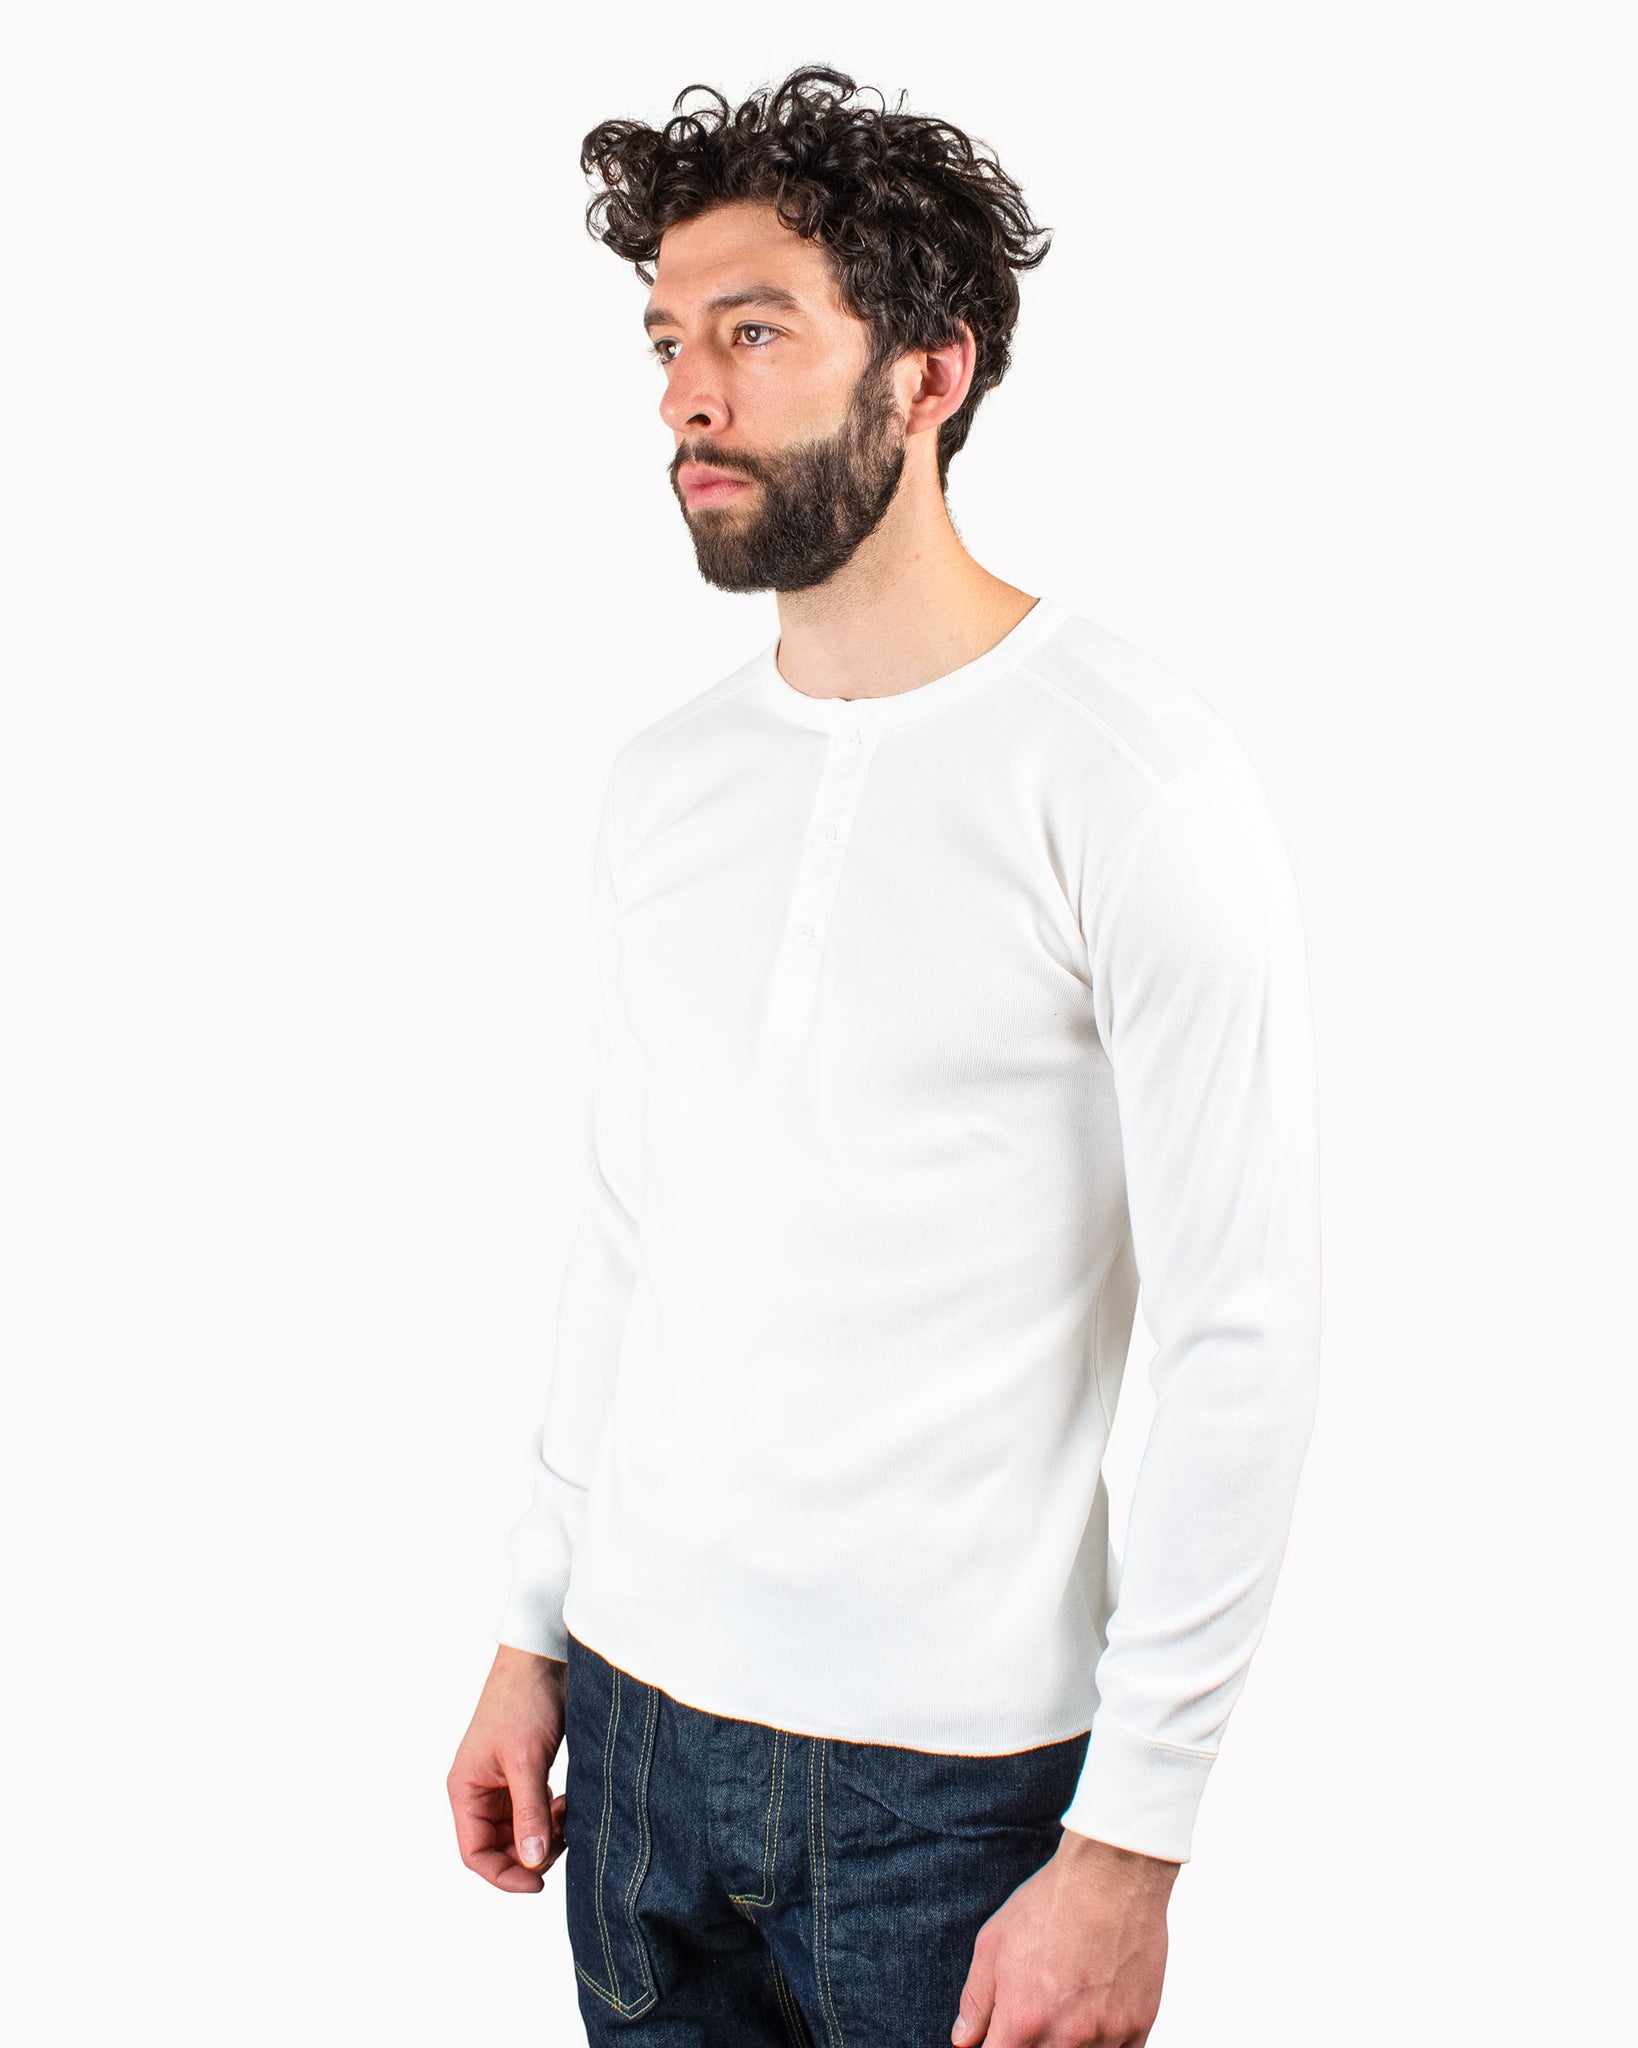 The Real McCoy's MC17117 Waffle Henley Shirt L/S White Close